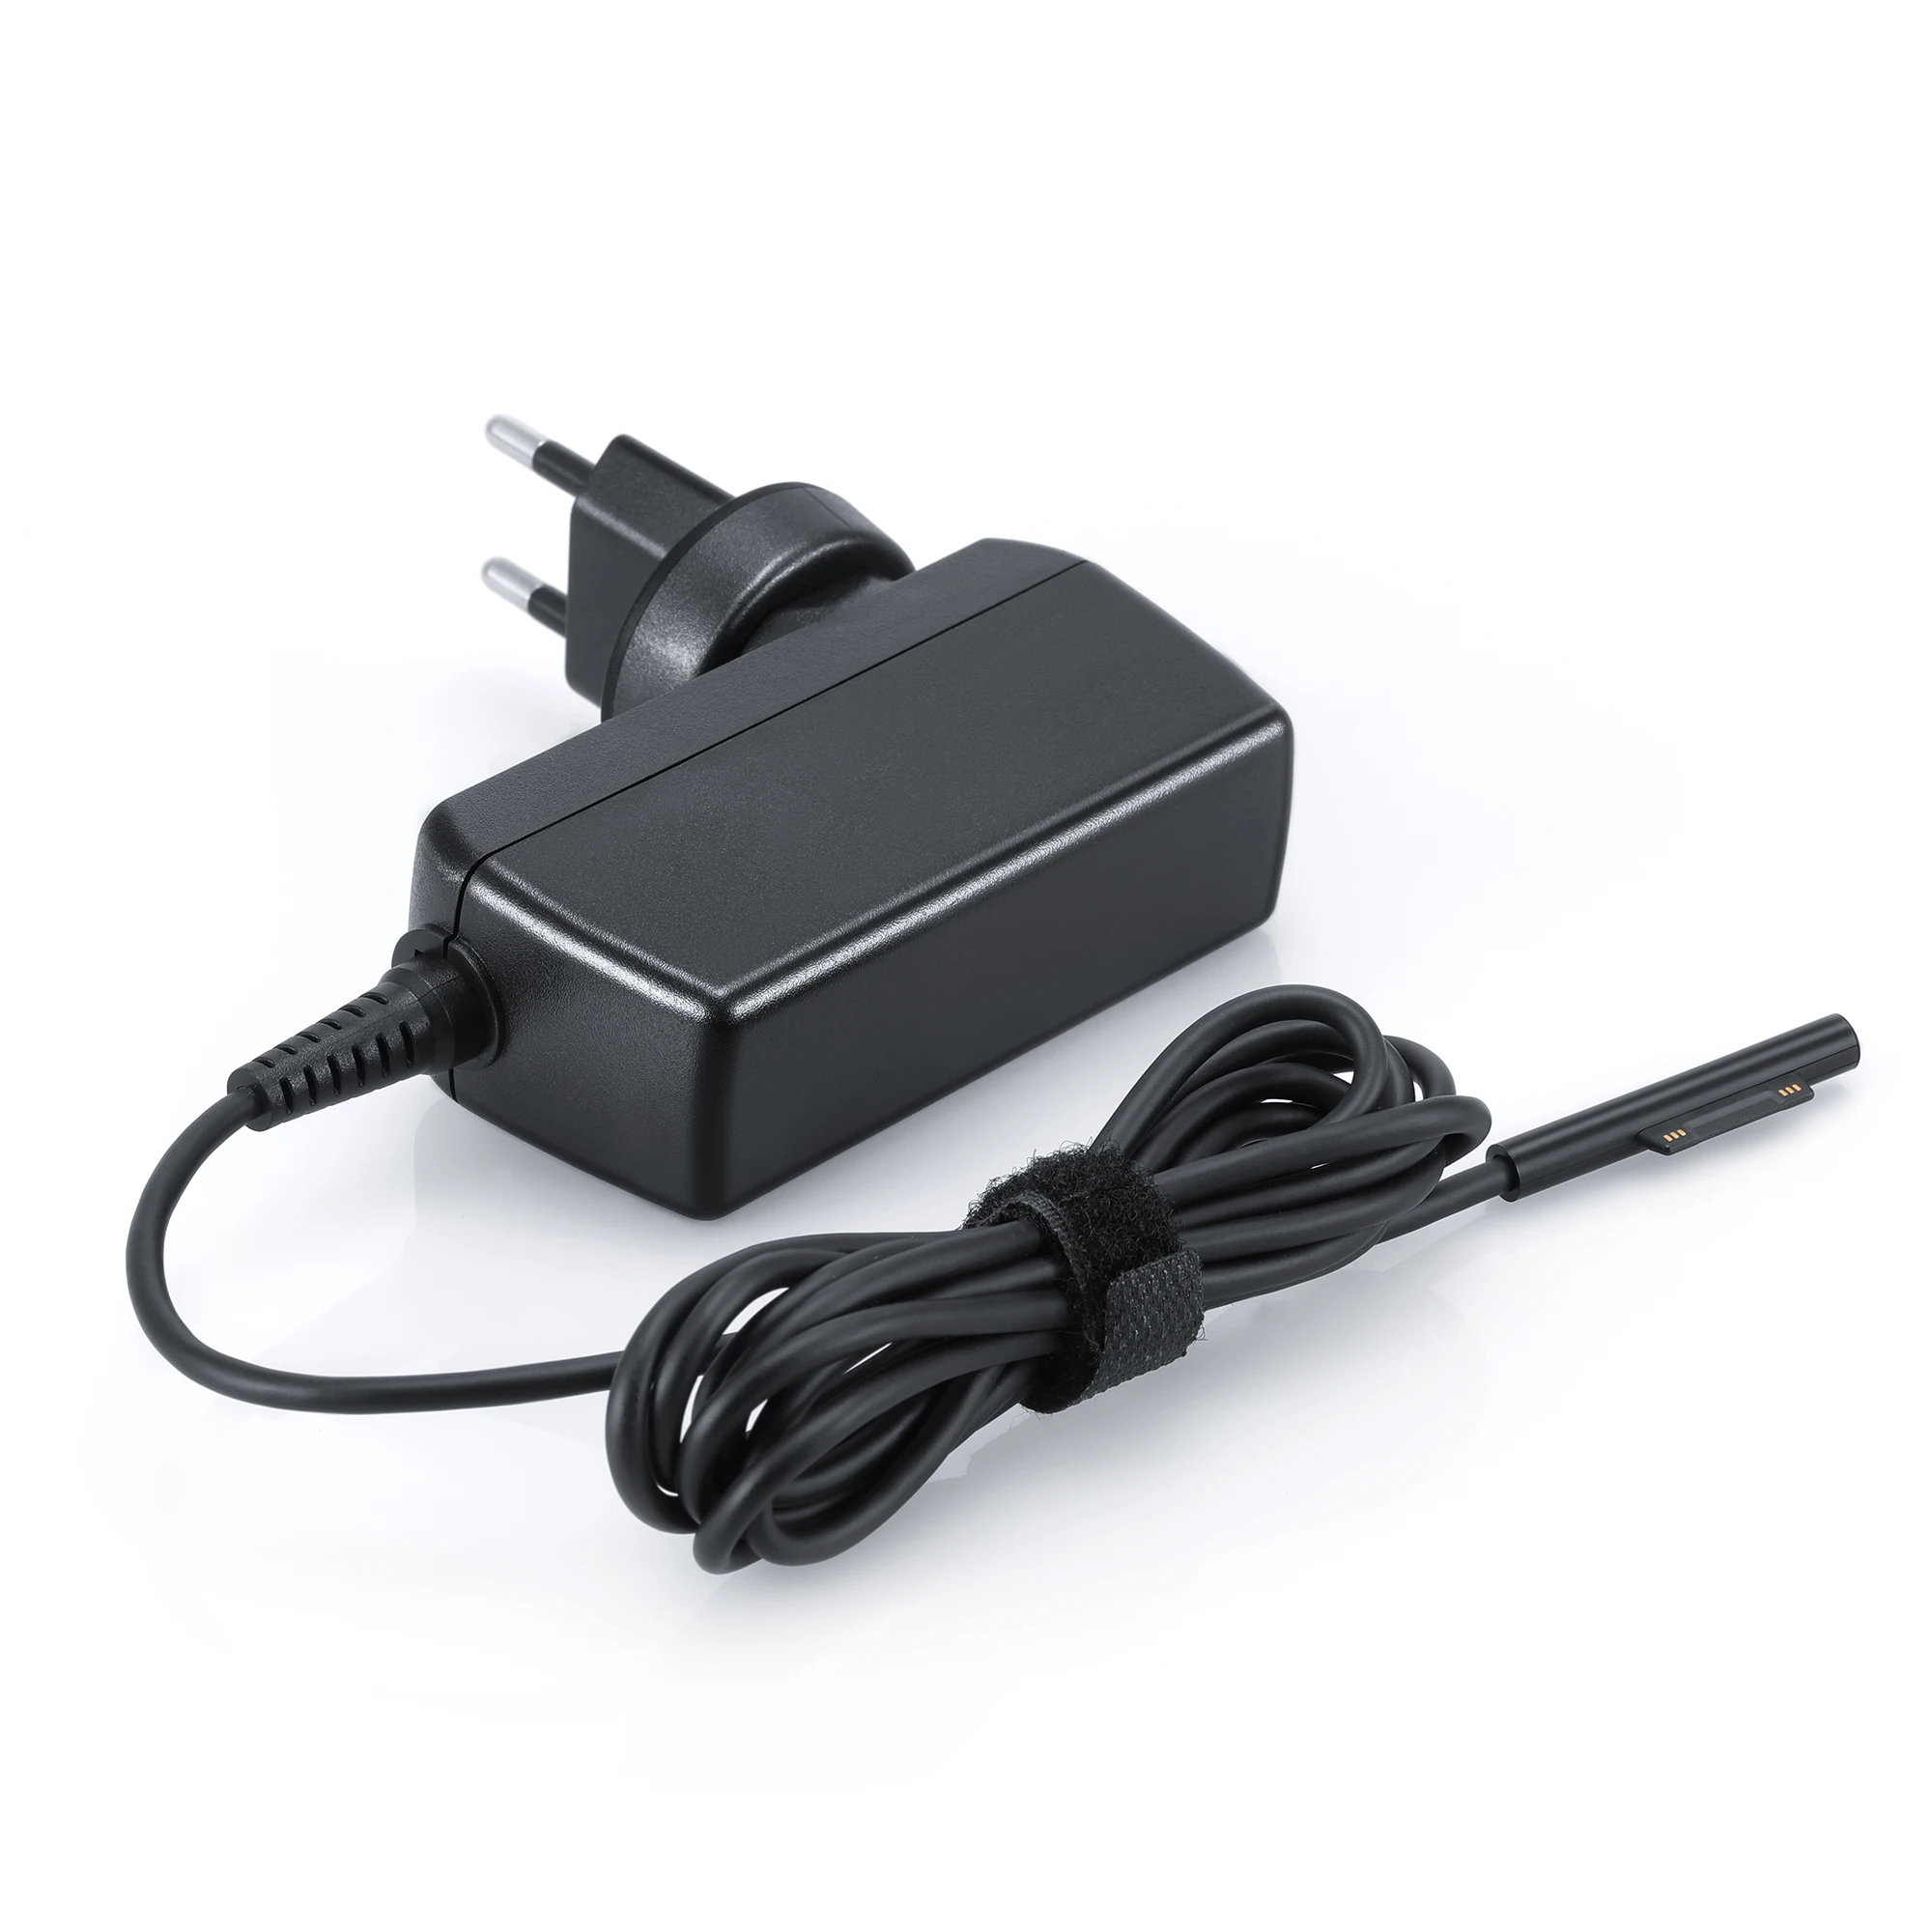 Genuine OEM Microsoft Surface Pro 4 Power AC Adapter Charger 1735 15V 1.6A 24W